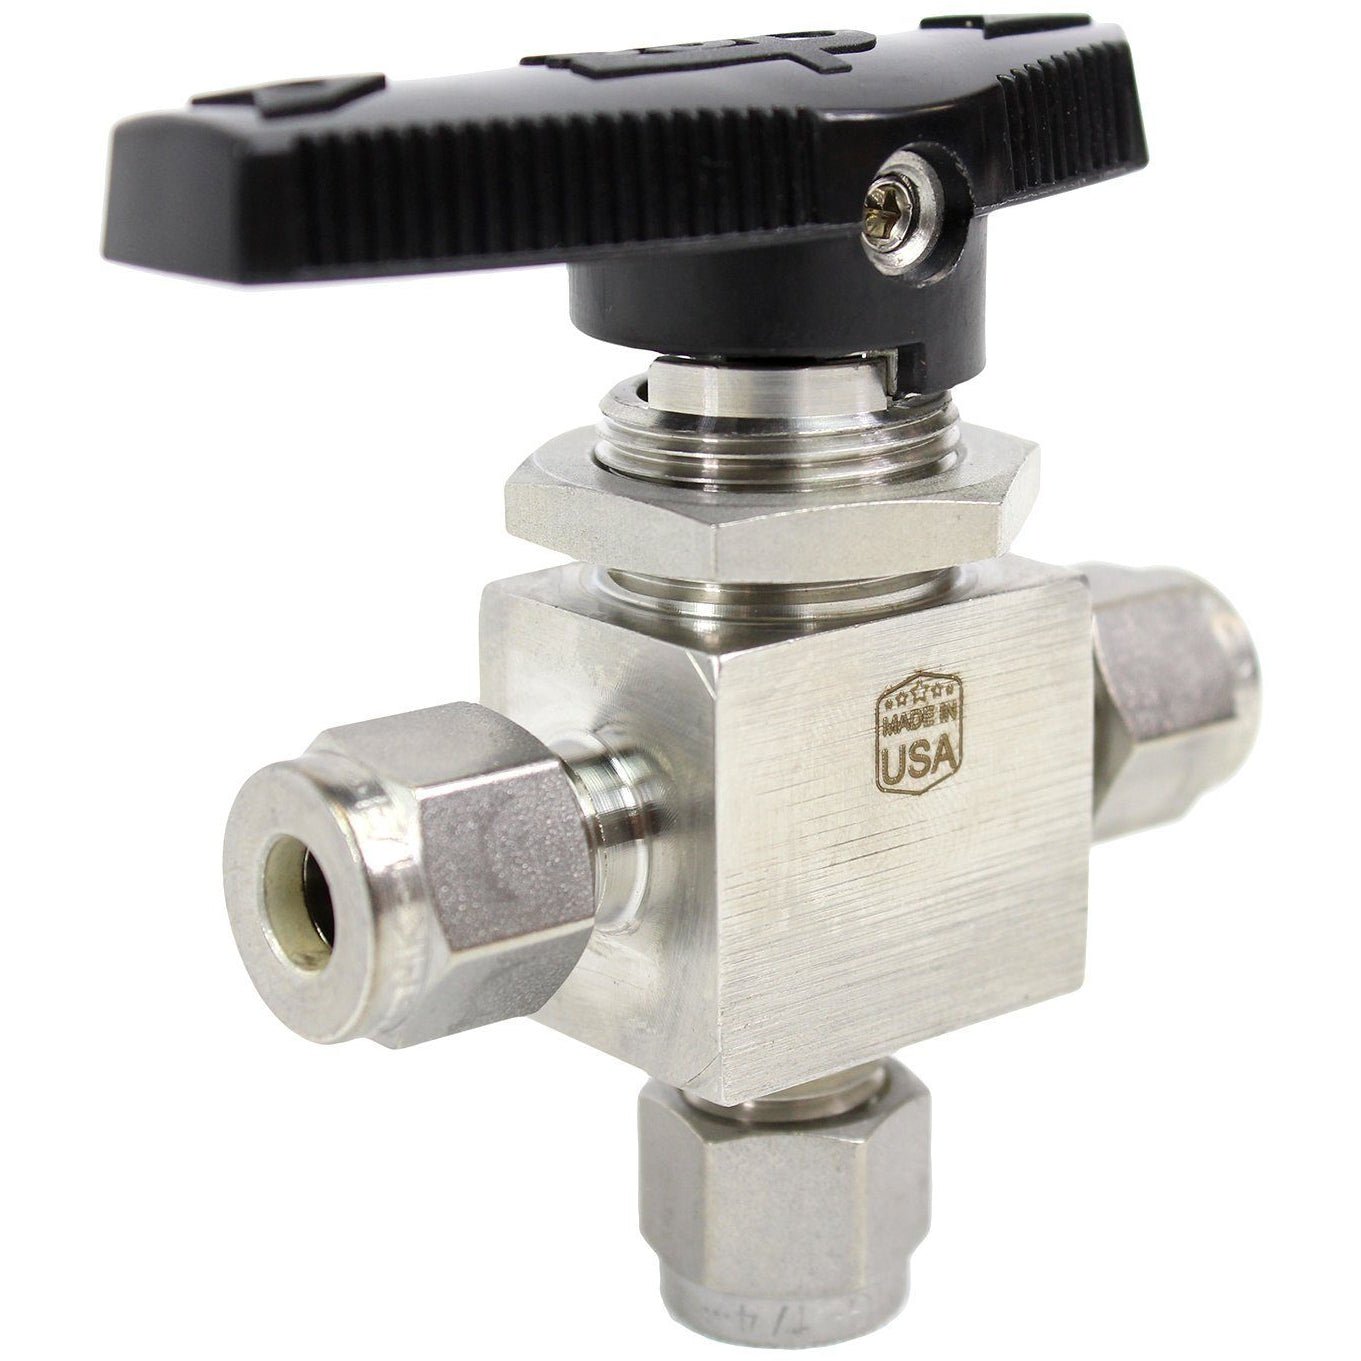 SSP - 3 Way Ball Valve - Fractional Tube Fitting Shop All Categories SSP Corporation 